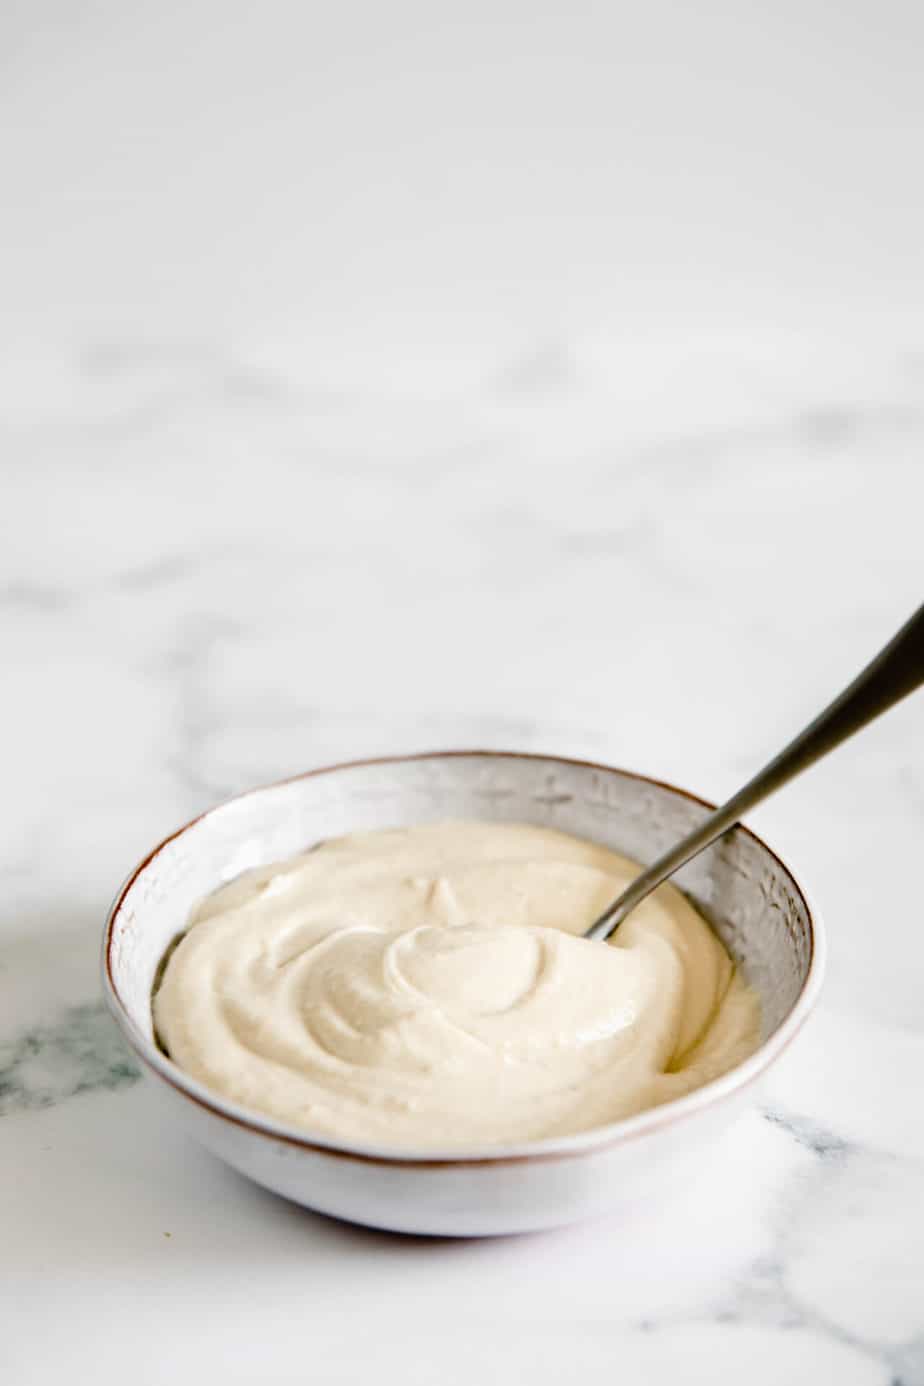 Ready for some Vegan Cream Cheese? This easy 5-ingredient plant-based cream cheese alternative is super smooth and rich and can be used for all types of sweet and savoury recipes.